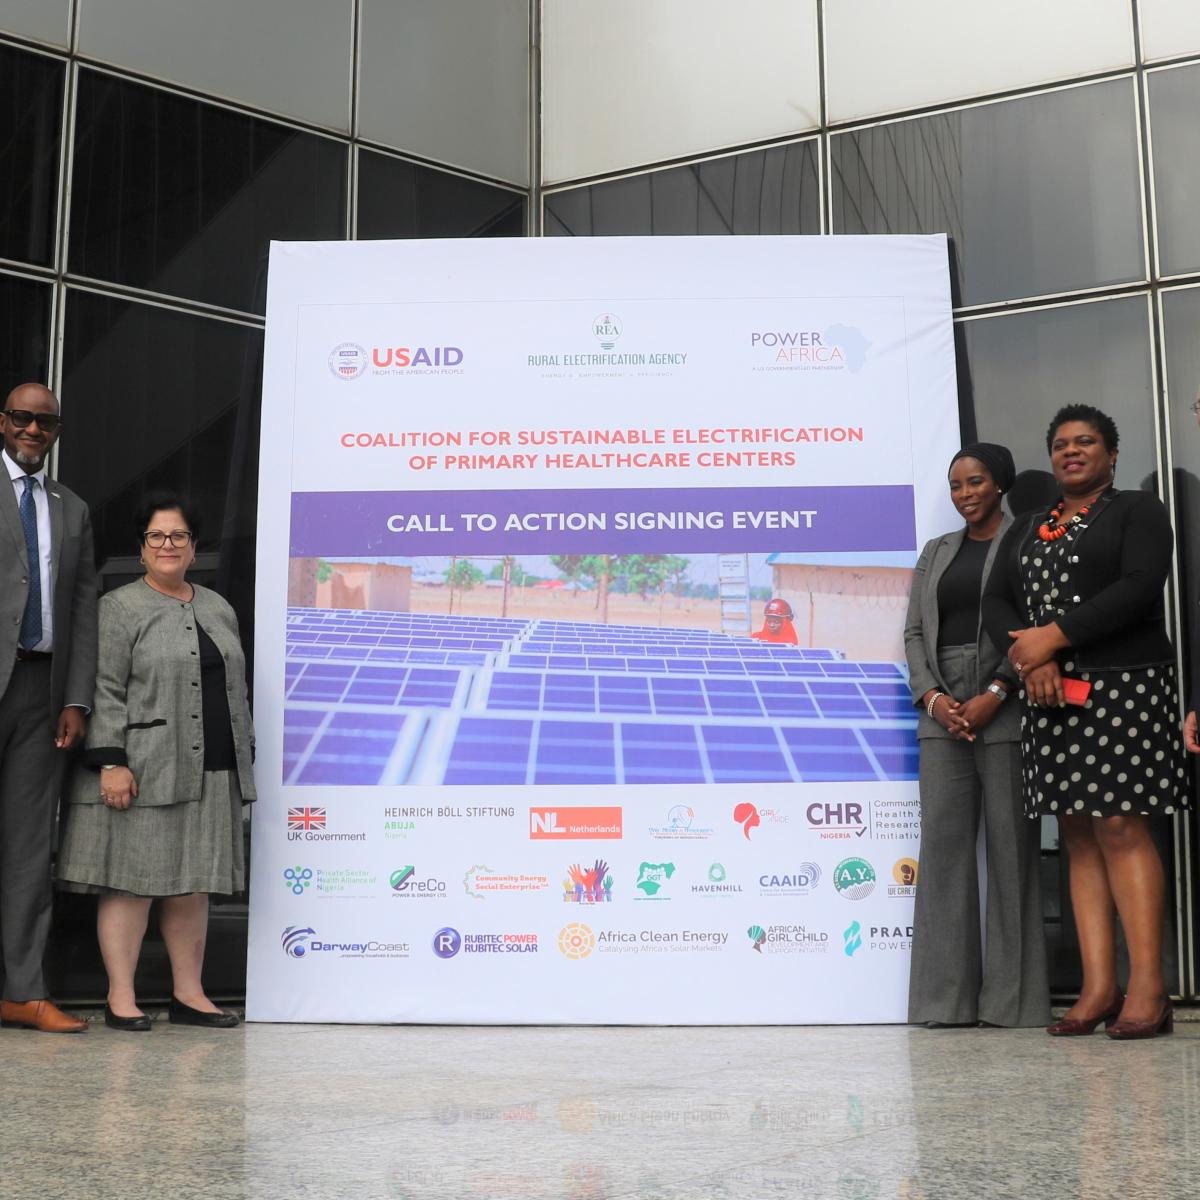 USAID/Nigeria, Power Africa, and the Government of Nigeria Rural Electrification Agency representatives at the call-to-action signing event in Abuja 